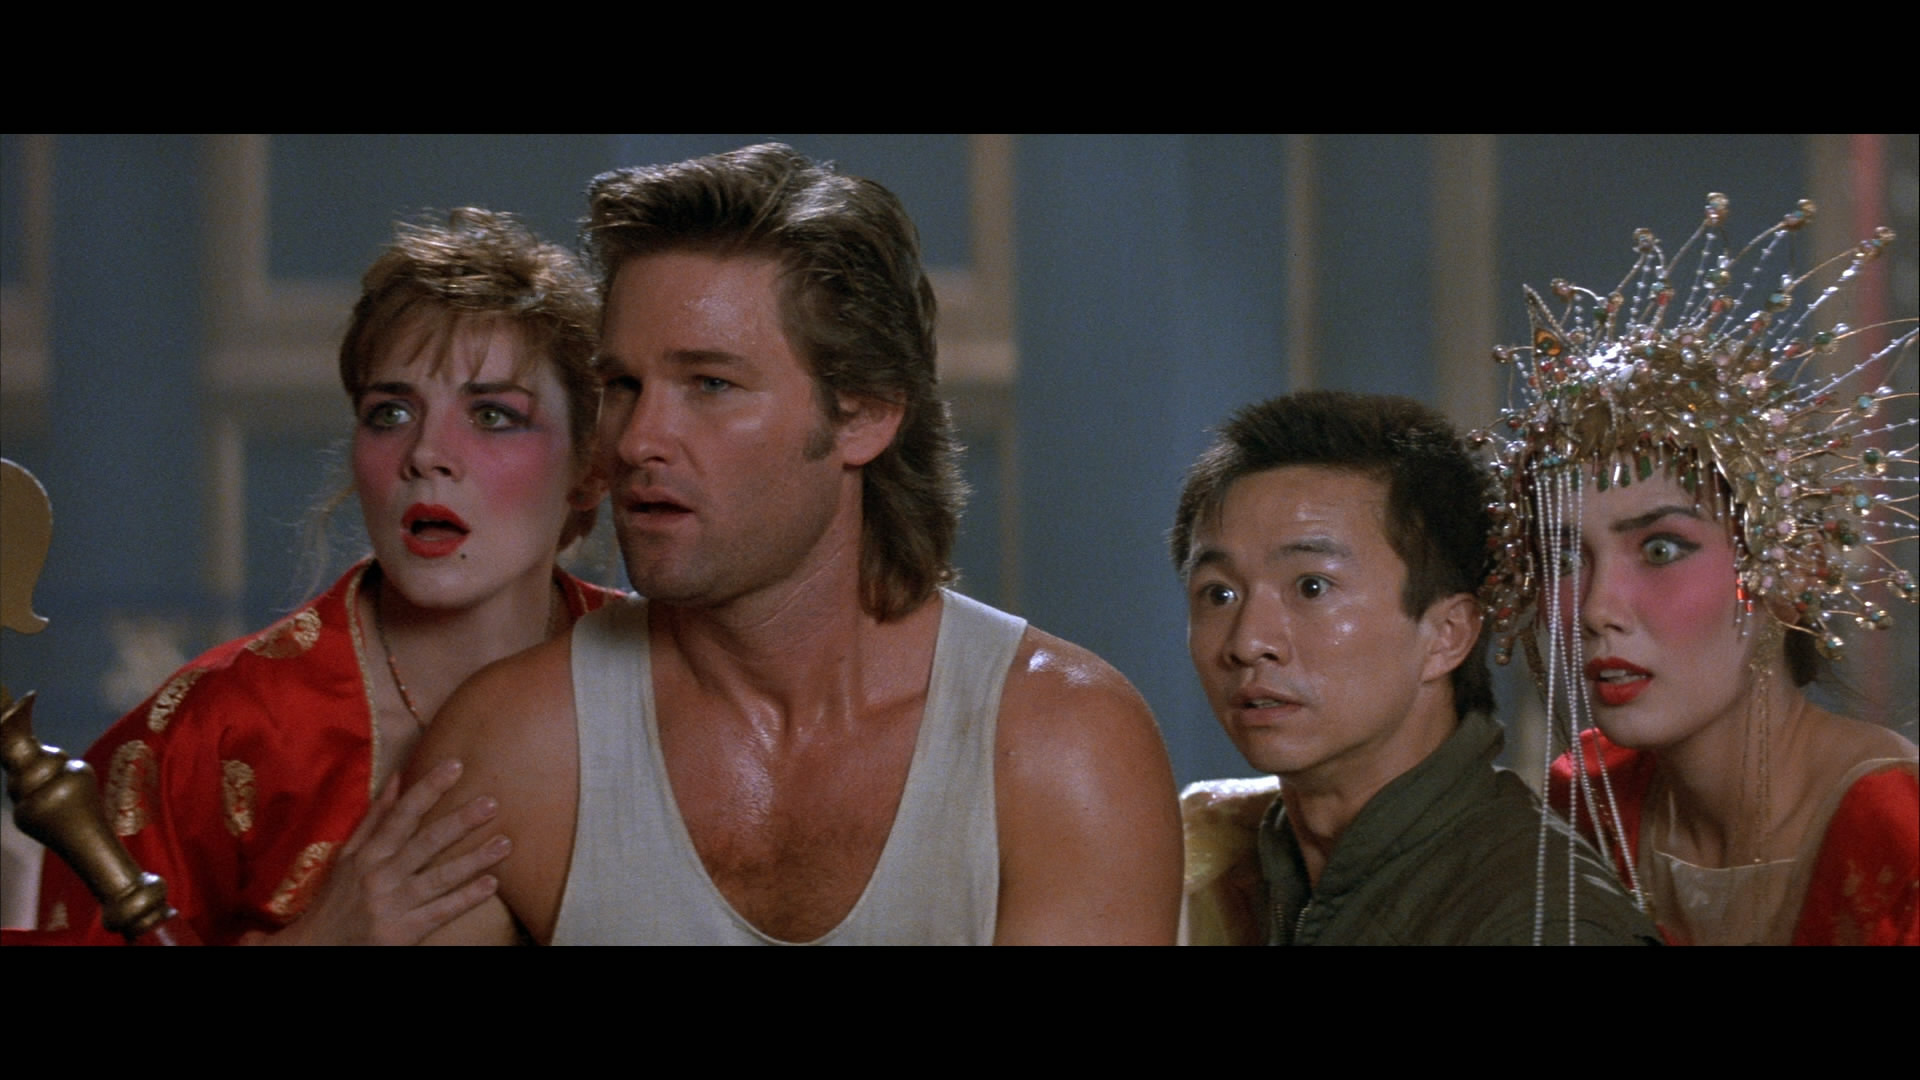 BIG TROUBLE in LITTLE CHINA / VAMPIRELLA / THE DARKNESS [Reviews]: Those real?